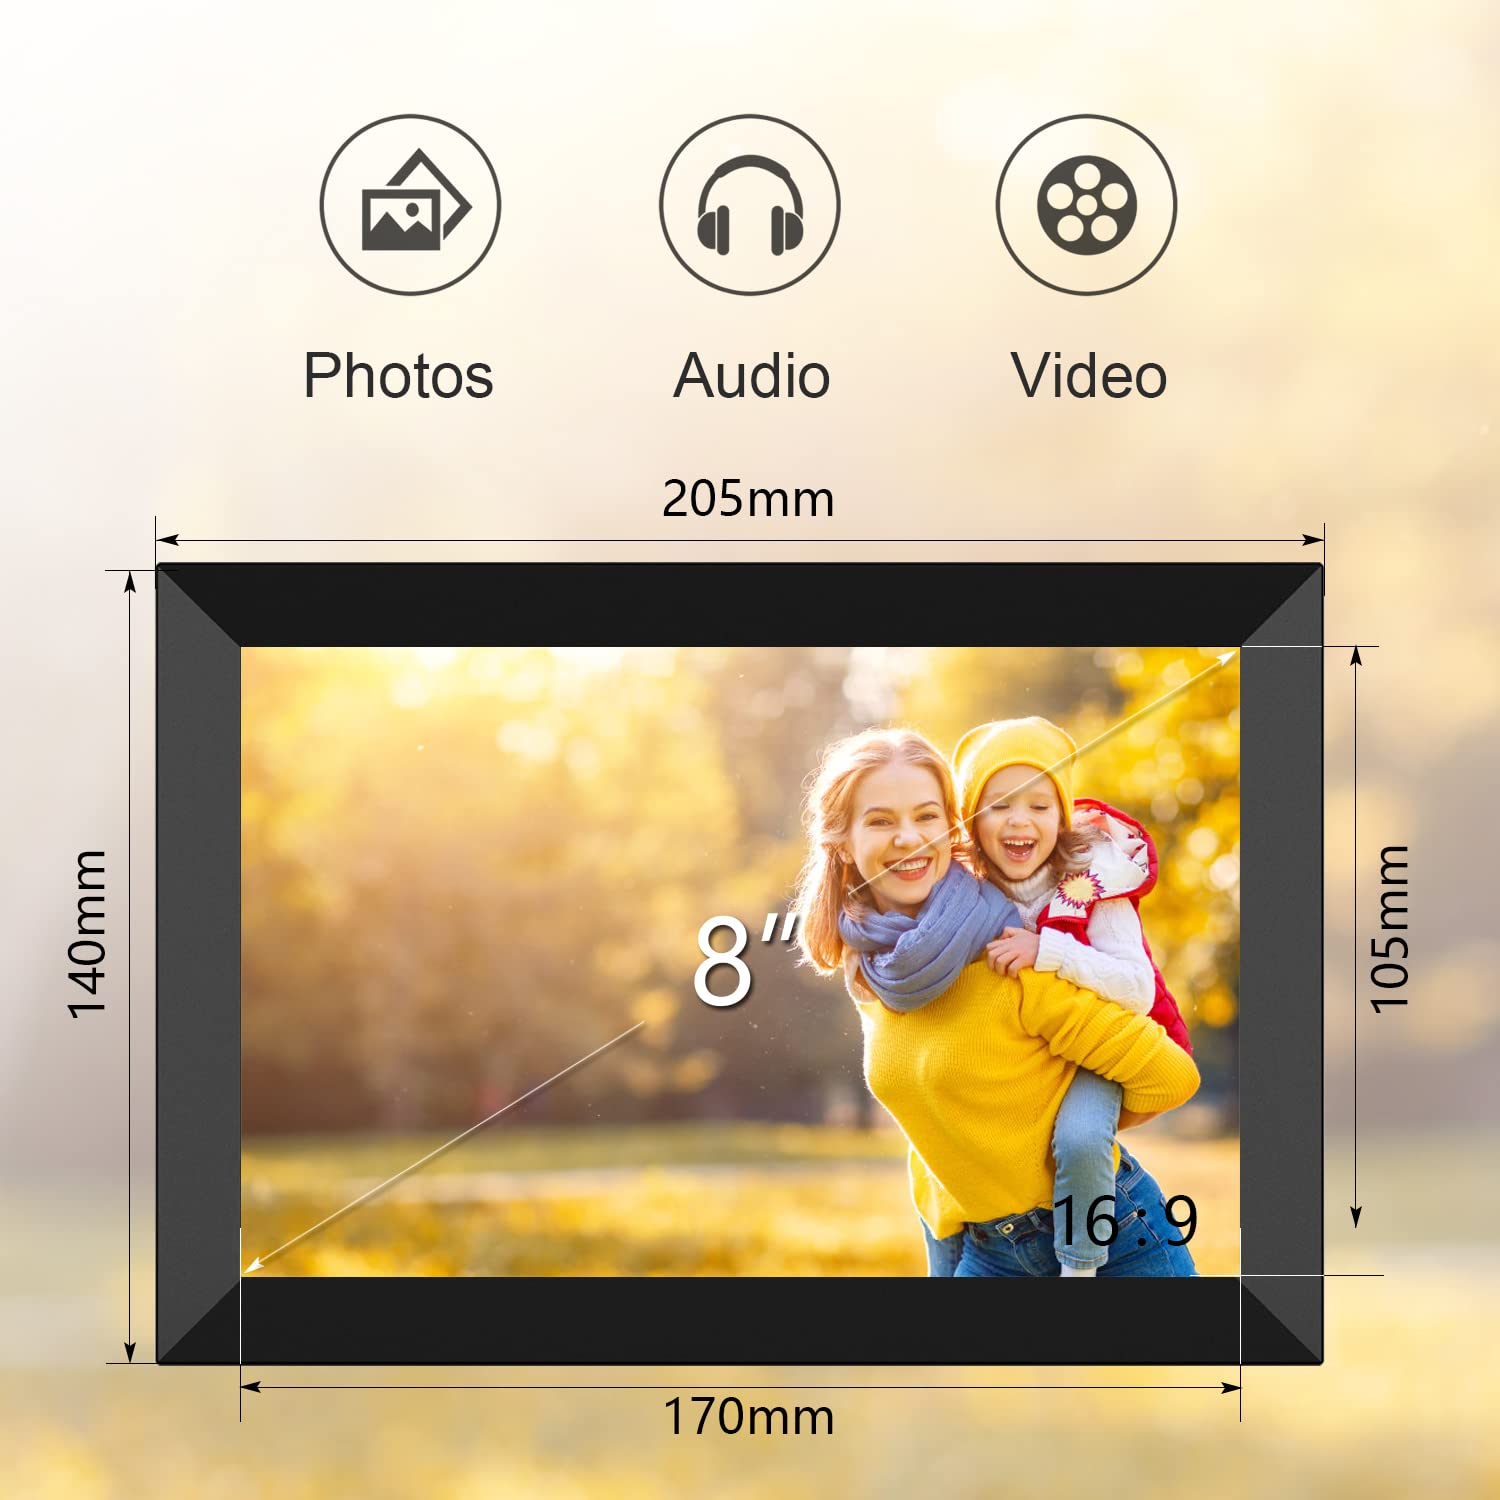 Digital Photo Frames,Newest UI Design YENOCK 8.2 inch 1920 x 1200 FHD High Resolution Full IPS Photo/Music/Video Player Calendar Alarm with Remote Control Digital Picture Frame